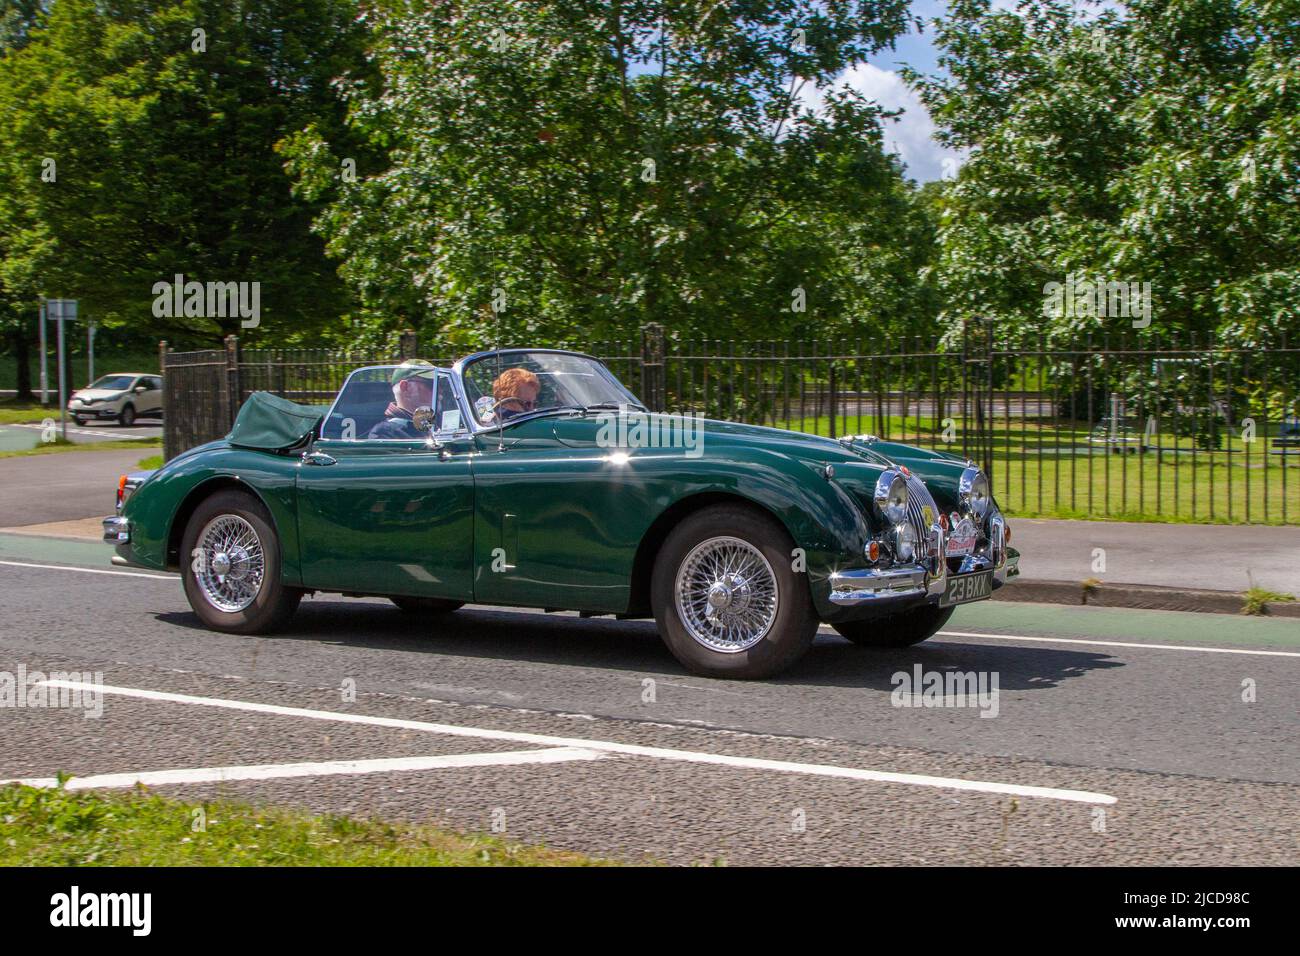 1961 60s sixties green Jaguar XK 3442cc petrol; automobiles featured during the 58th year of the Manchester to Blackpool Touring Assembly for Veteran, Vintage, Classic and Cherished cars. Stock Photo